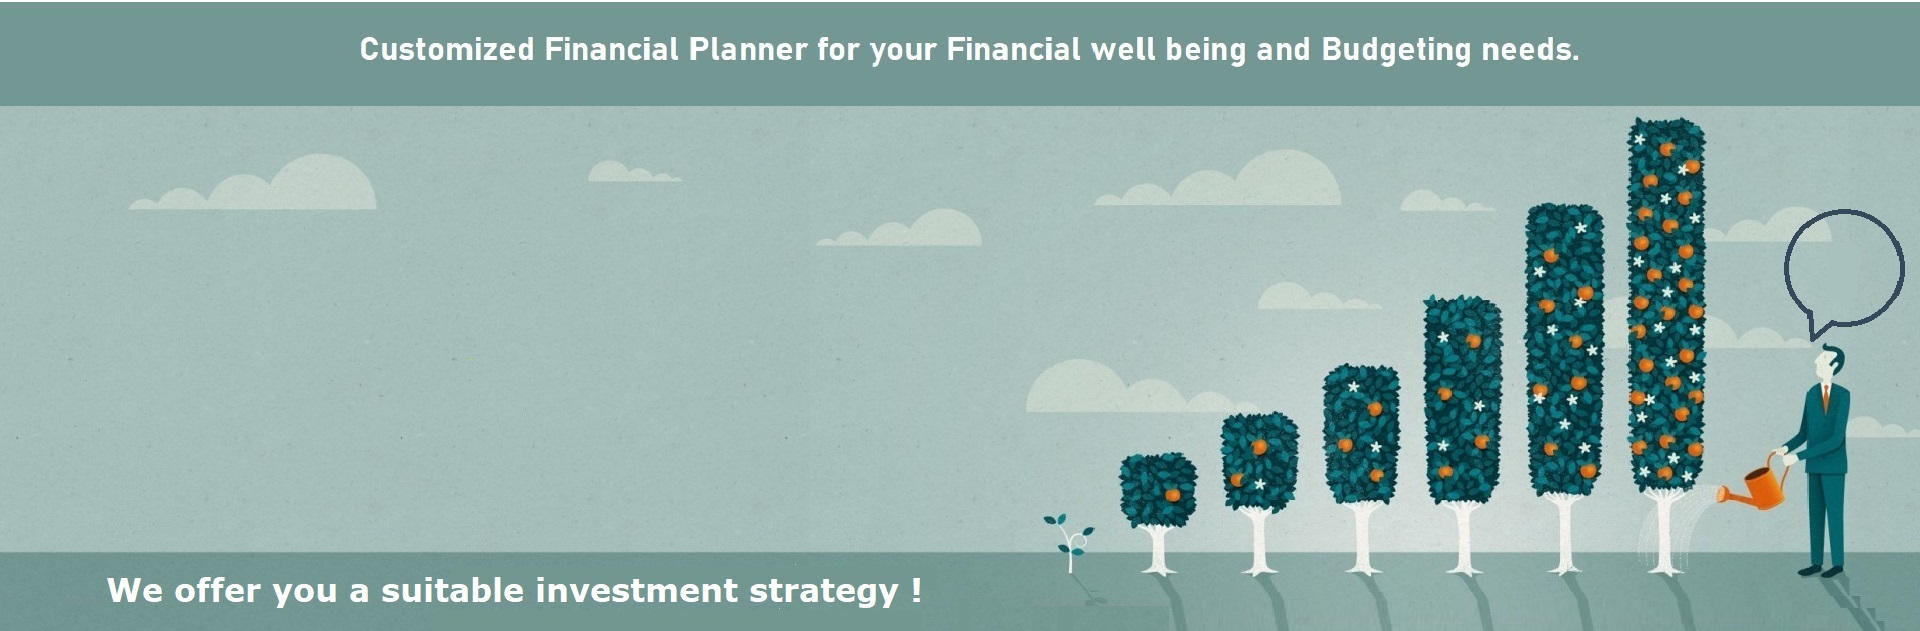 Customized Financial Planner